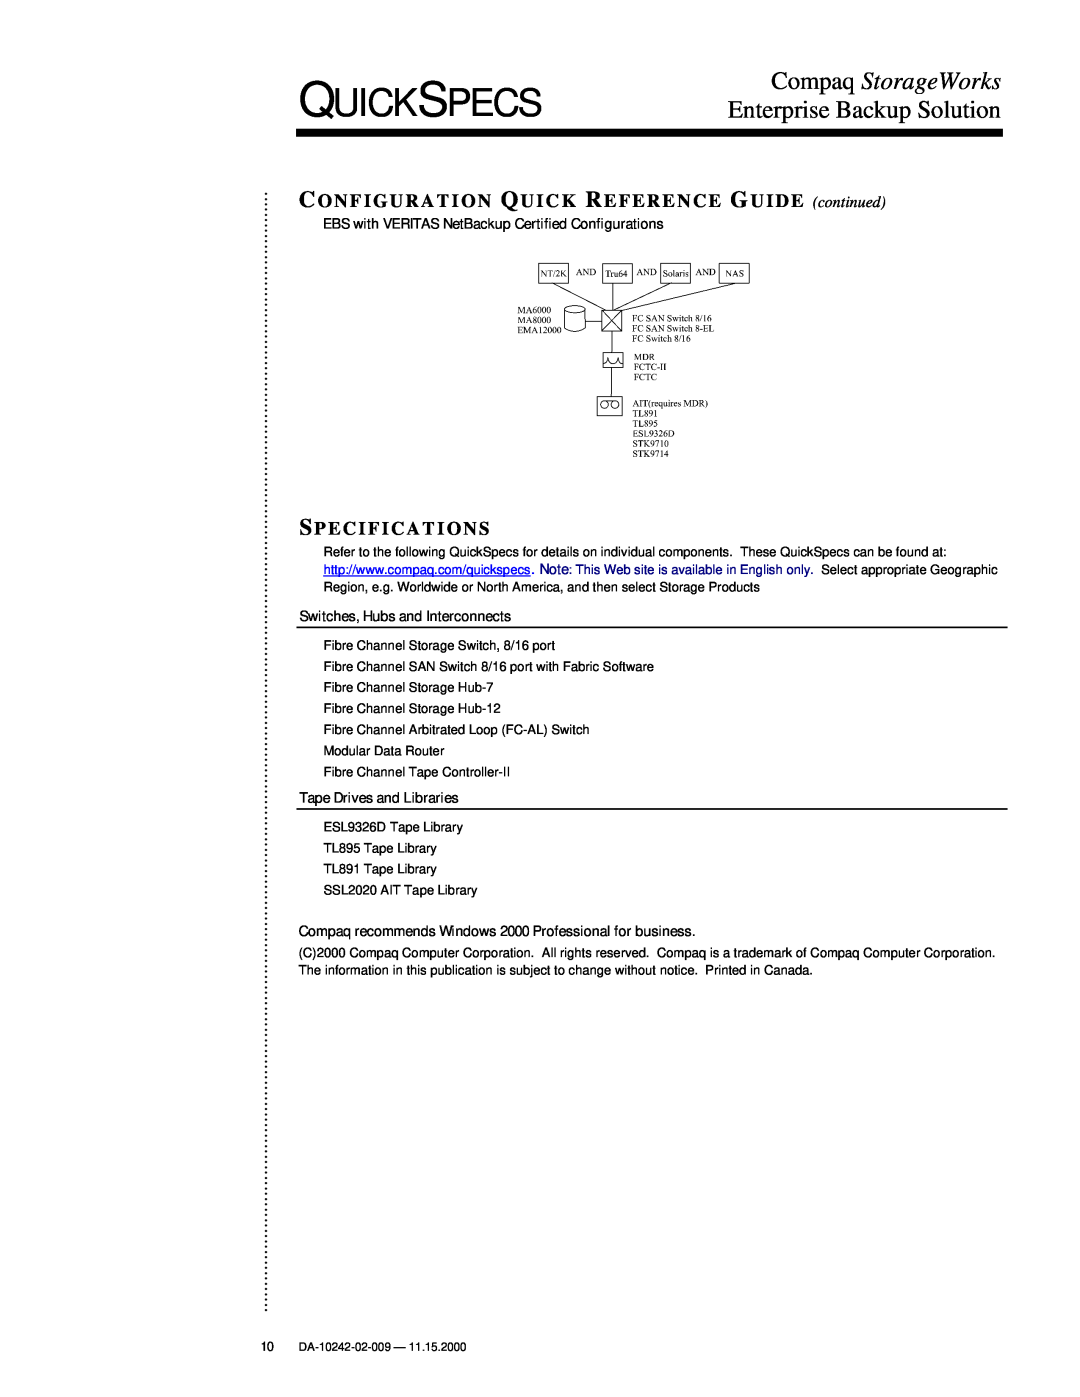 Compaq esl9326d, DA-10242 CONFIGURATION QUICK REFERENCE GUIDE continued, S Pecifications, Switches, Hubs and Interconnects 